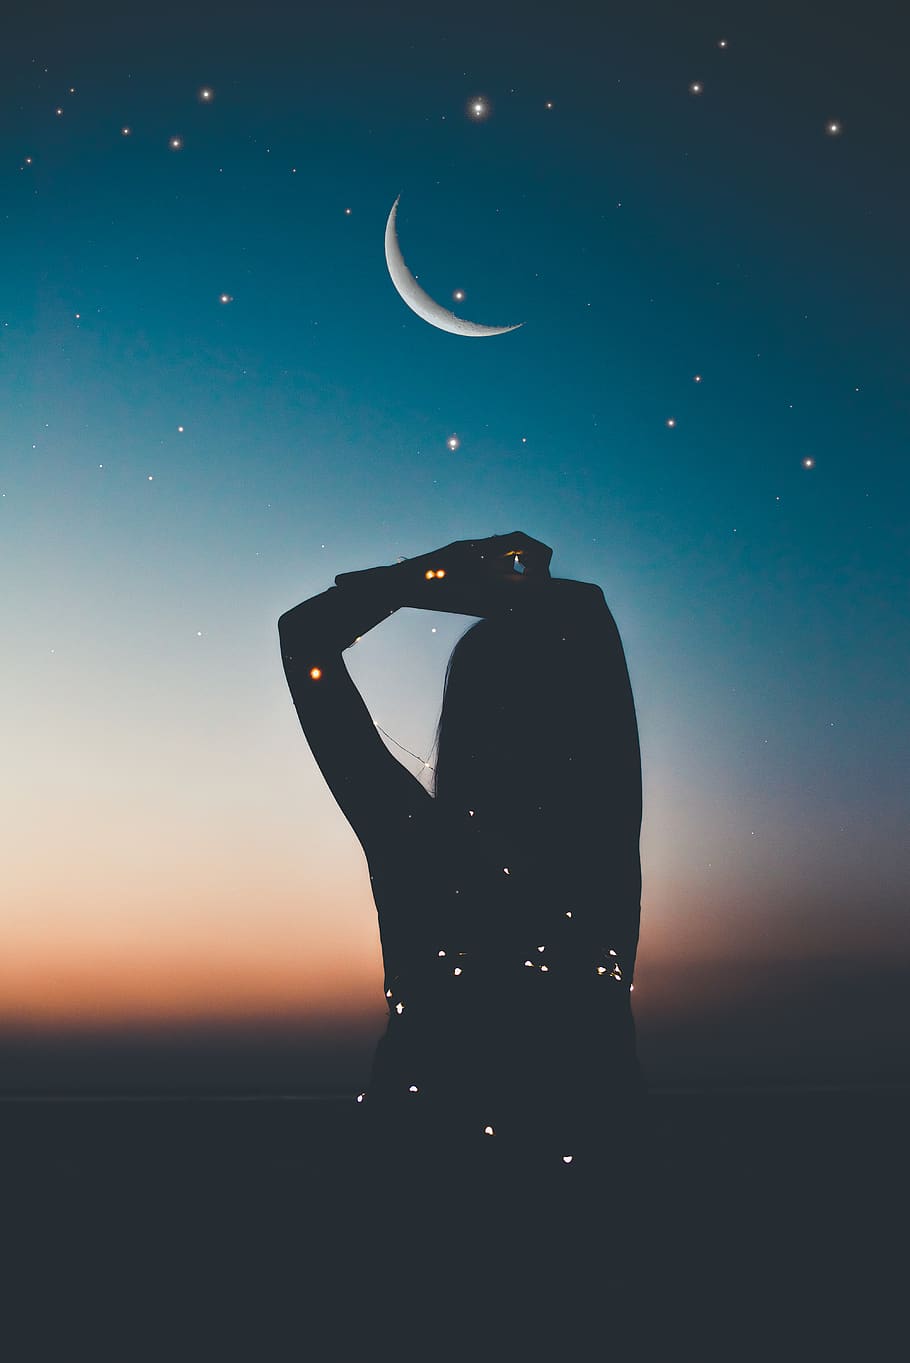 Silhouette Photo of Woman, art, astrology, astronomy, backlit